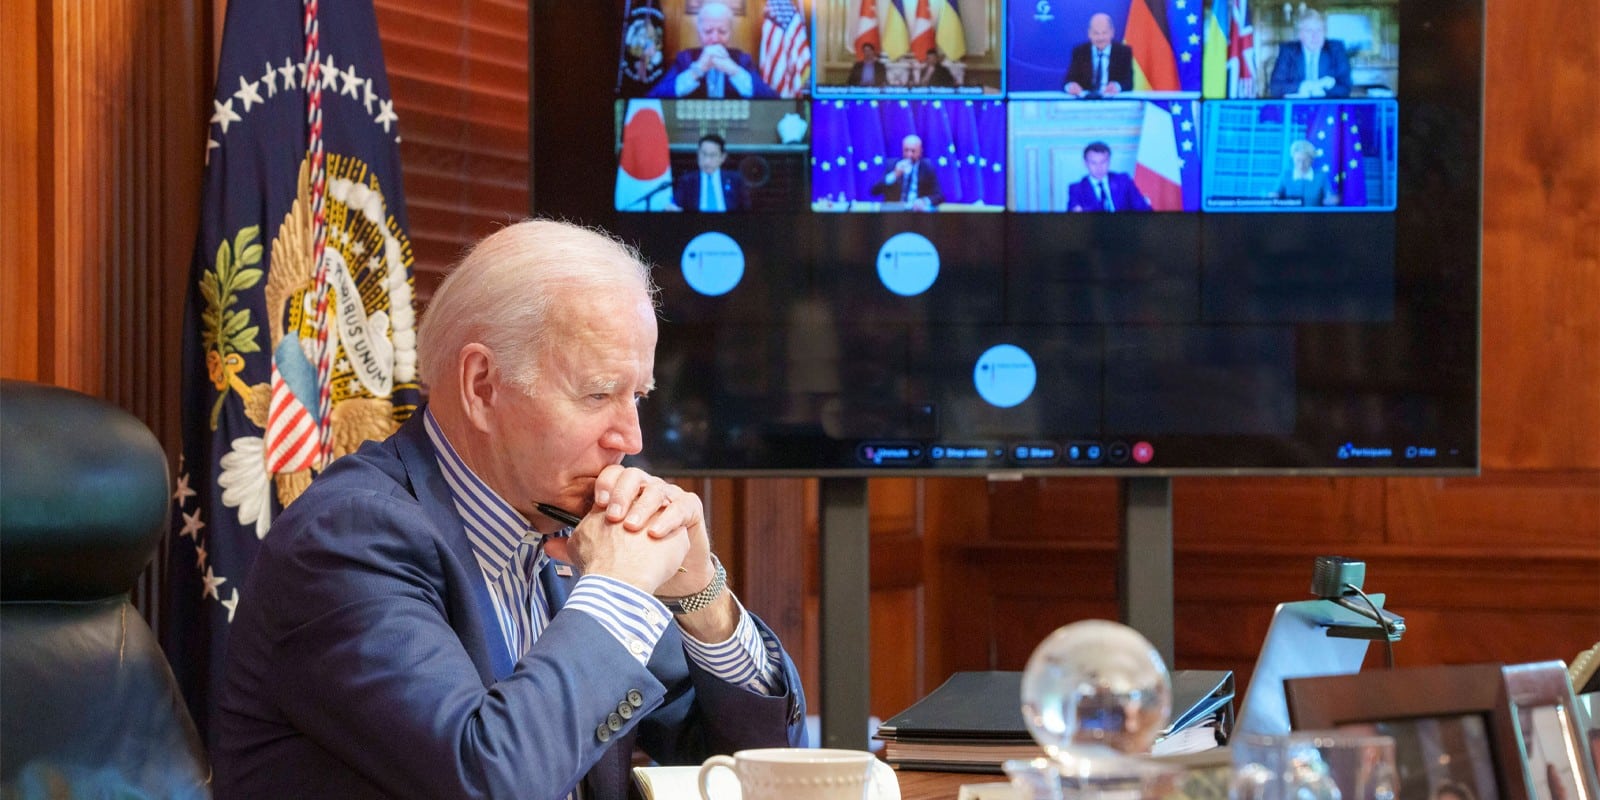 President Joe Biden listens during the Group of Seven video conference from his private residence, May 8, 2022 in Greenville, Delaware.